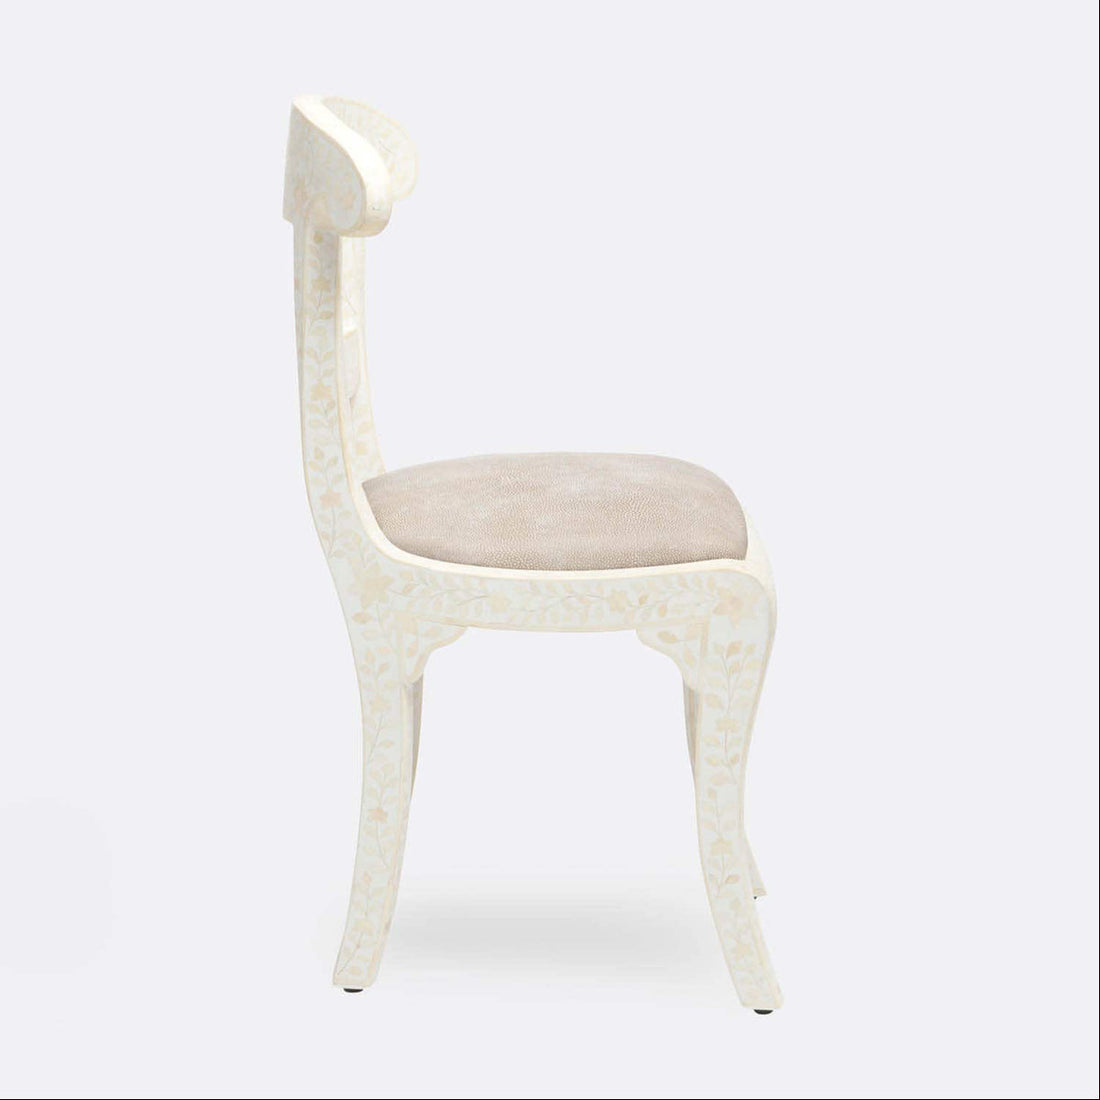 Made Goods Ines Rajasthan Bone Inlay Accent Chair in White Resin